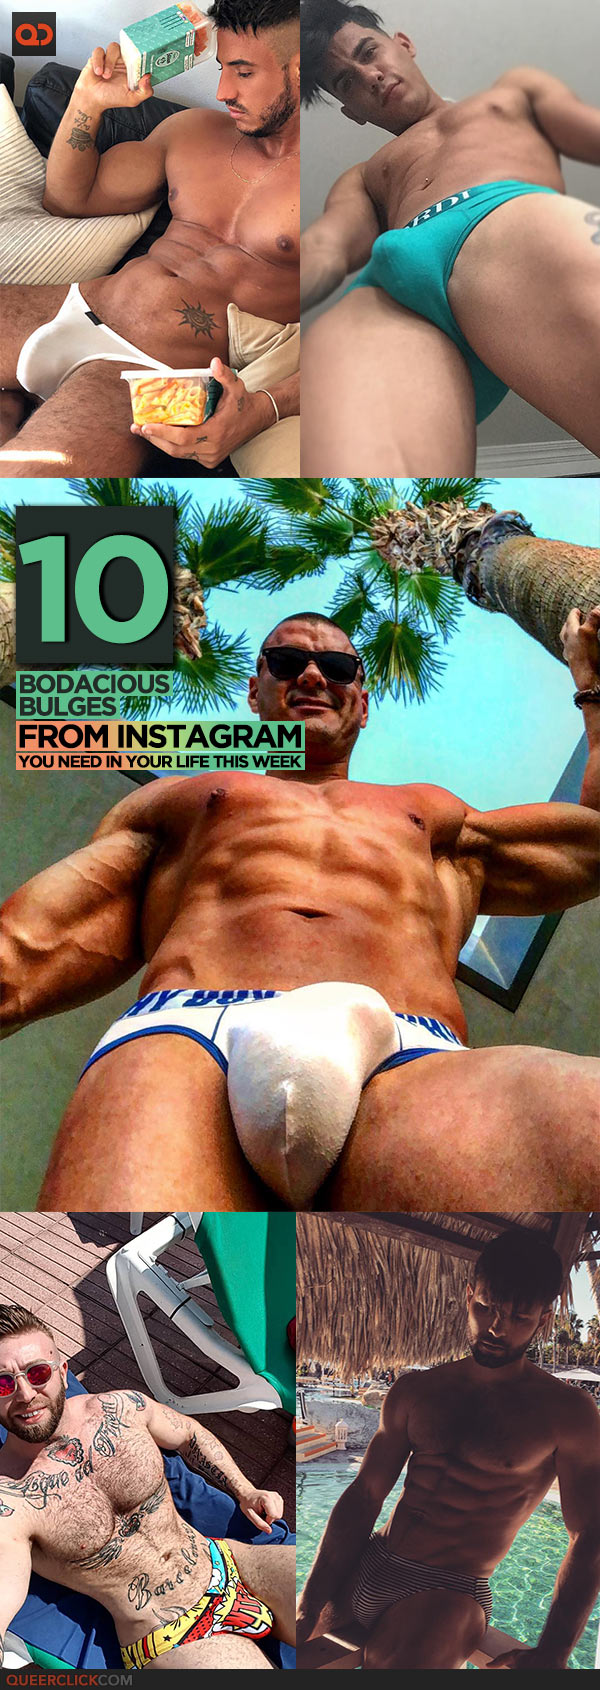 10 Bodacious Bulges From Instagram You Need In Your Life This Week!